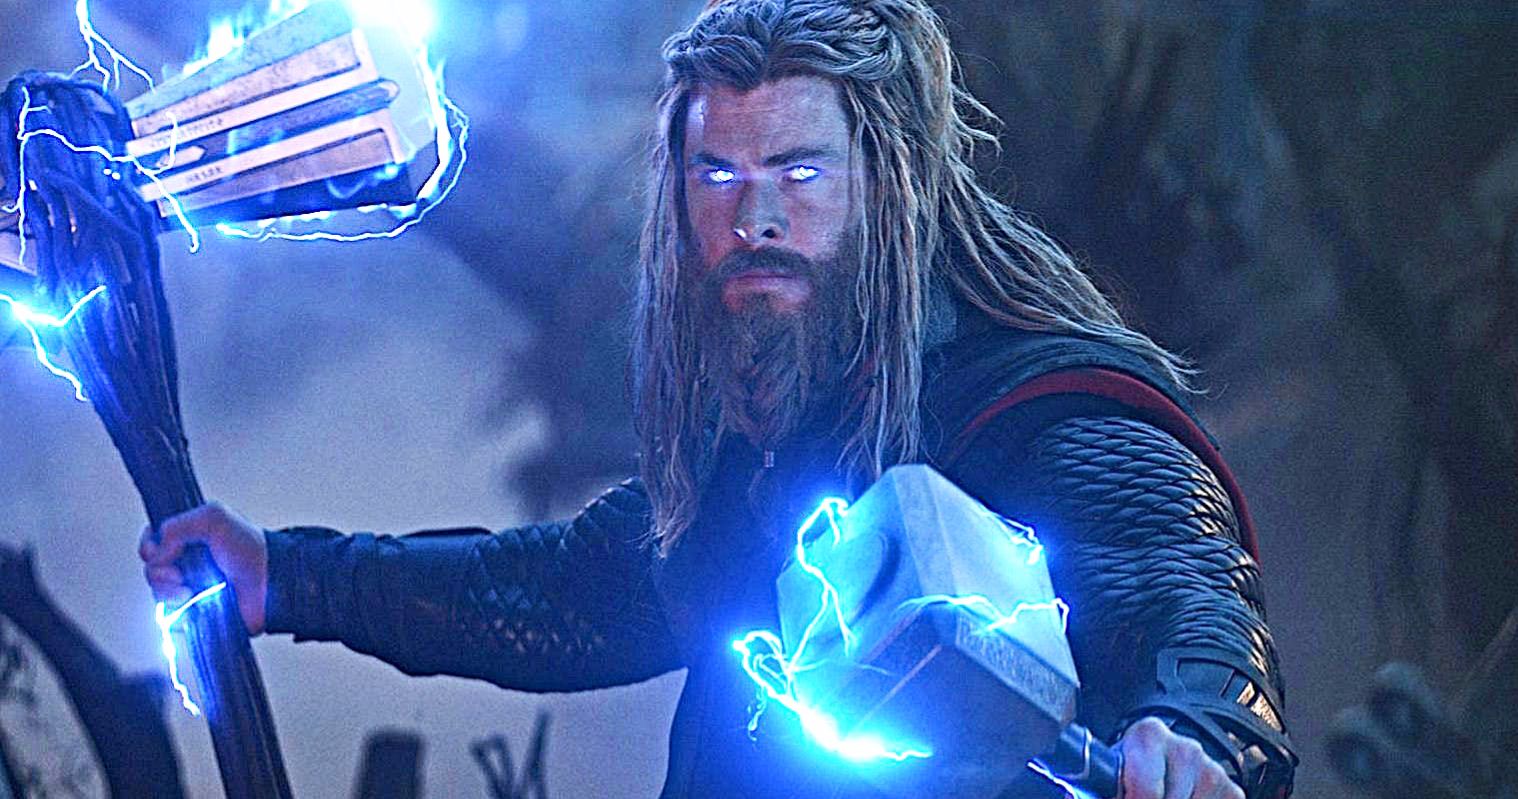 Chris Hemsworth Talks Fat Thor and His Fight to Keep Him in Avengers: Endgame